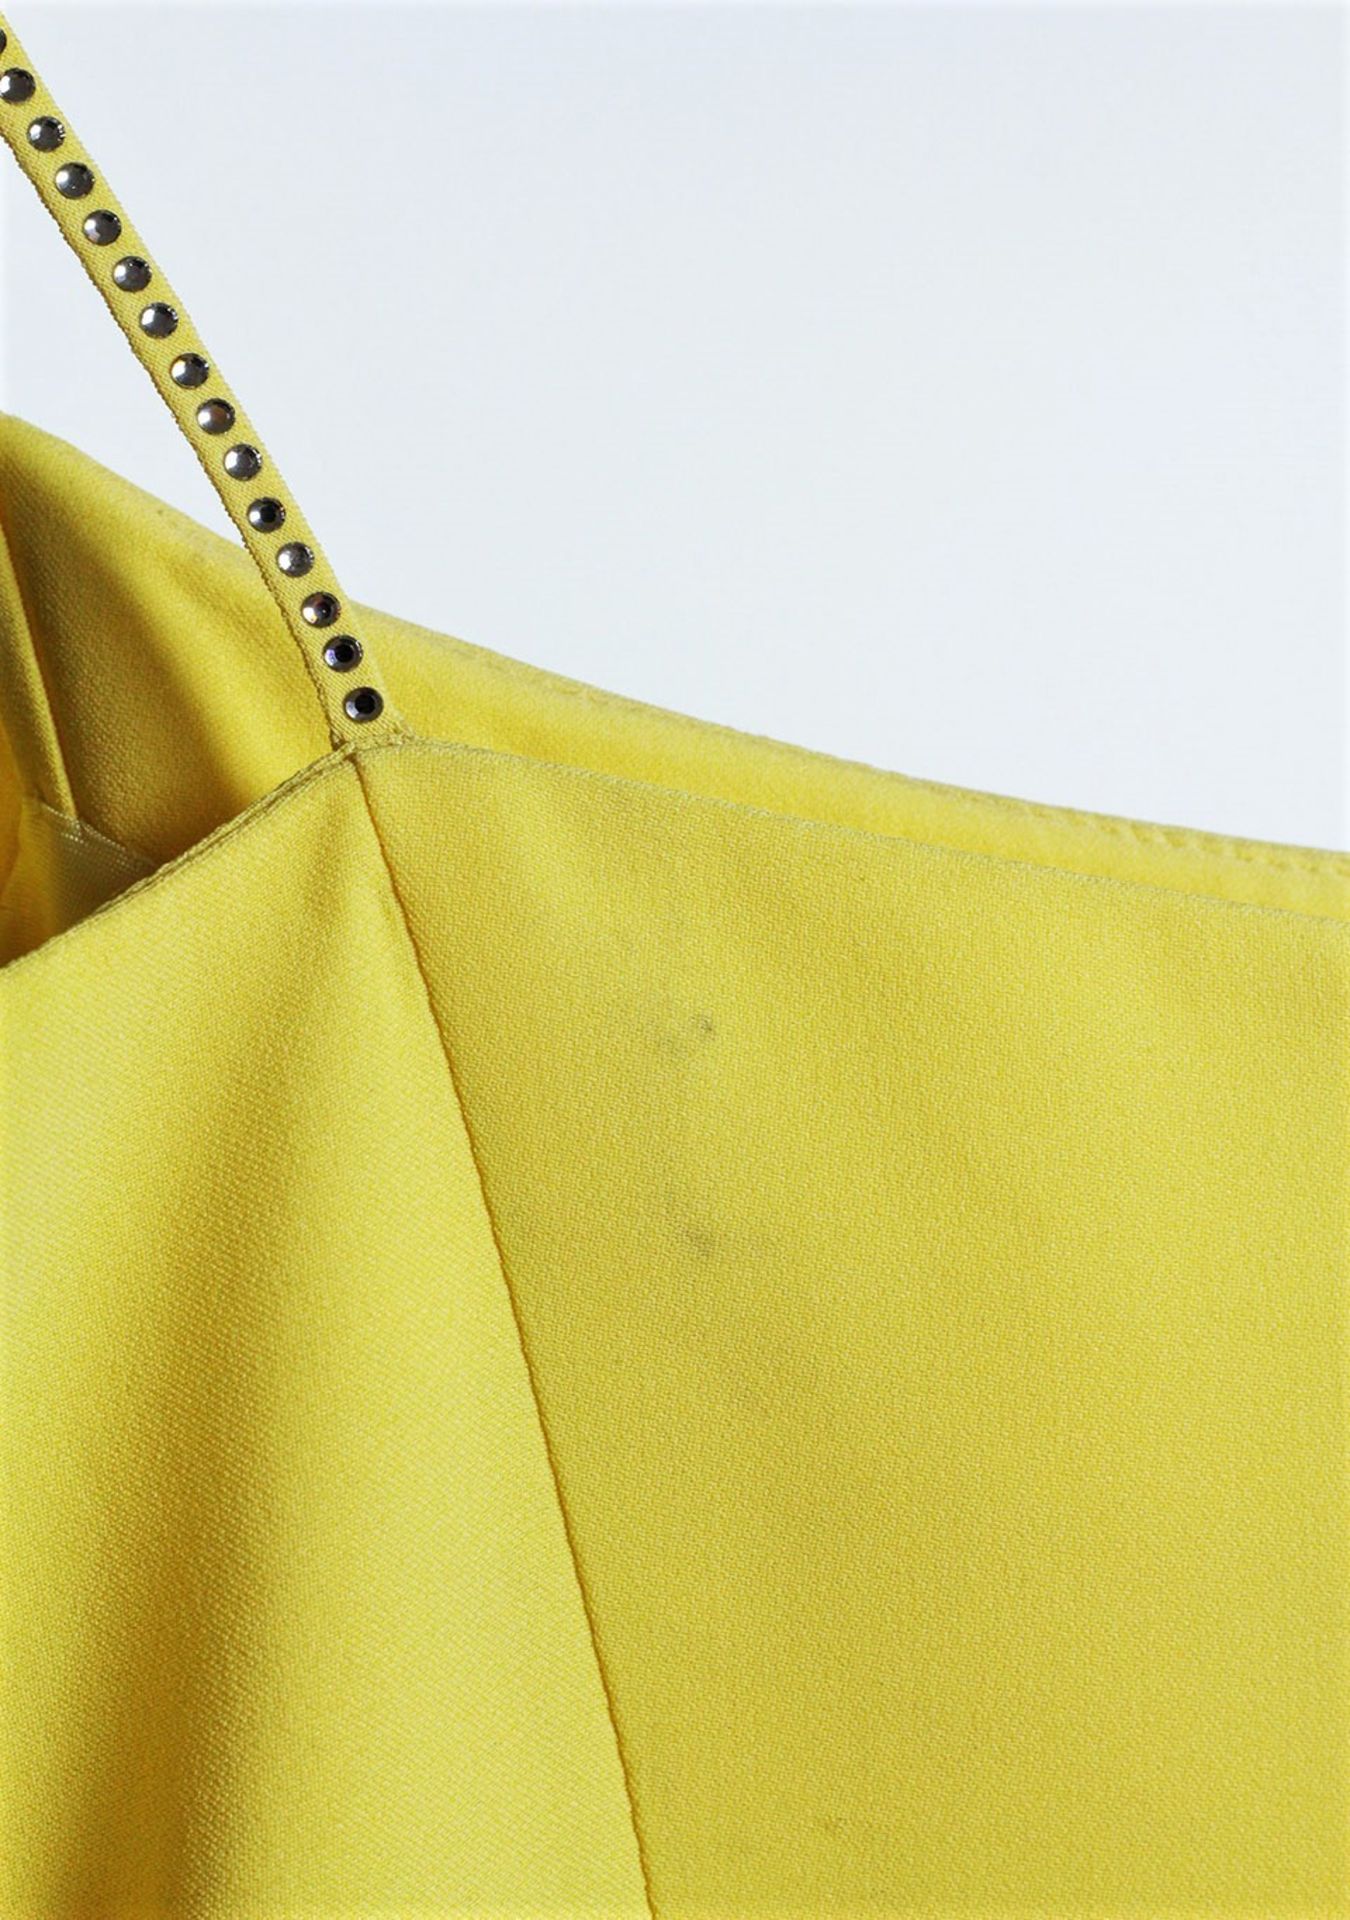 1 x Boutique Le Duc Yellow Dress - Size: 12 - Material: 68% Acetate, 32% Viscose - From a High End - Image 13 of 14